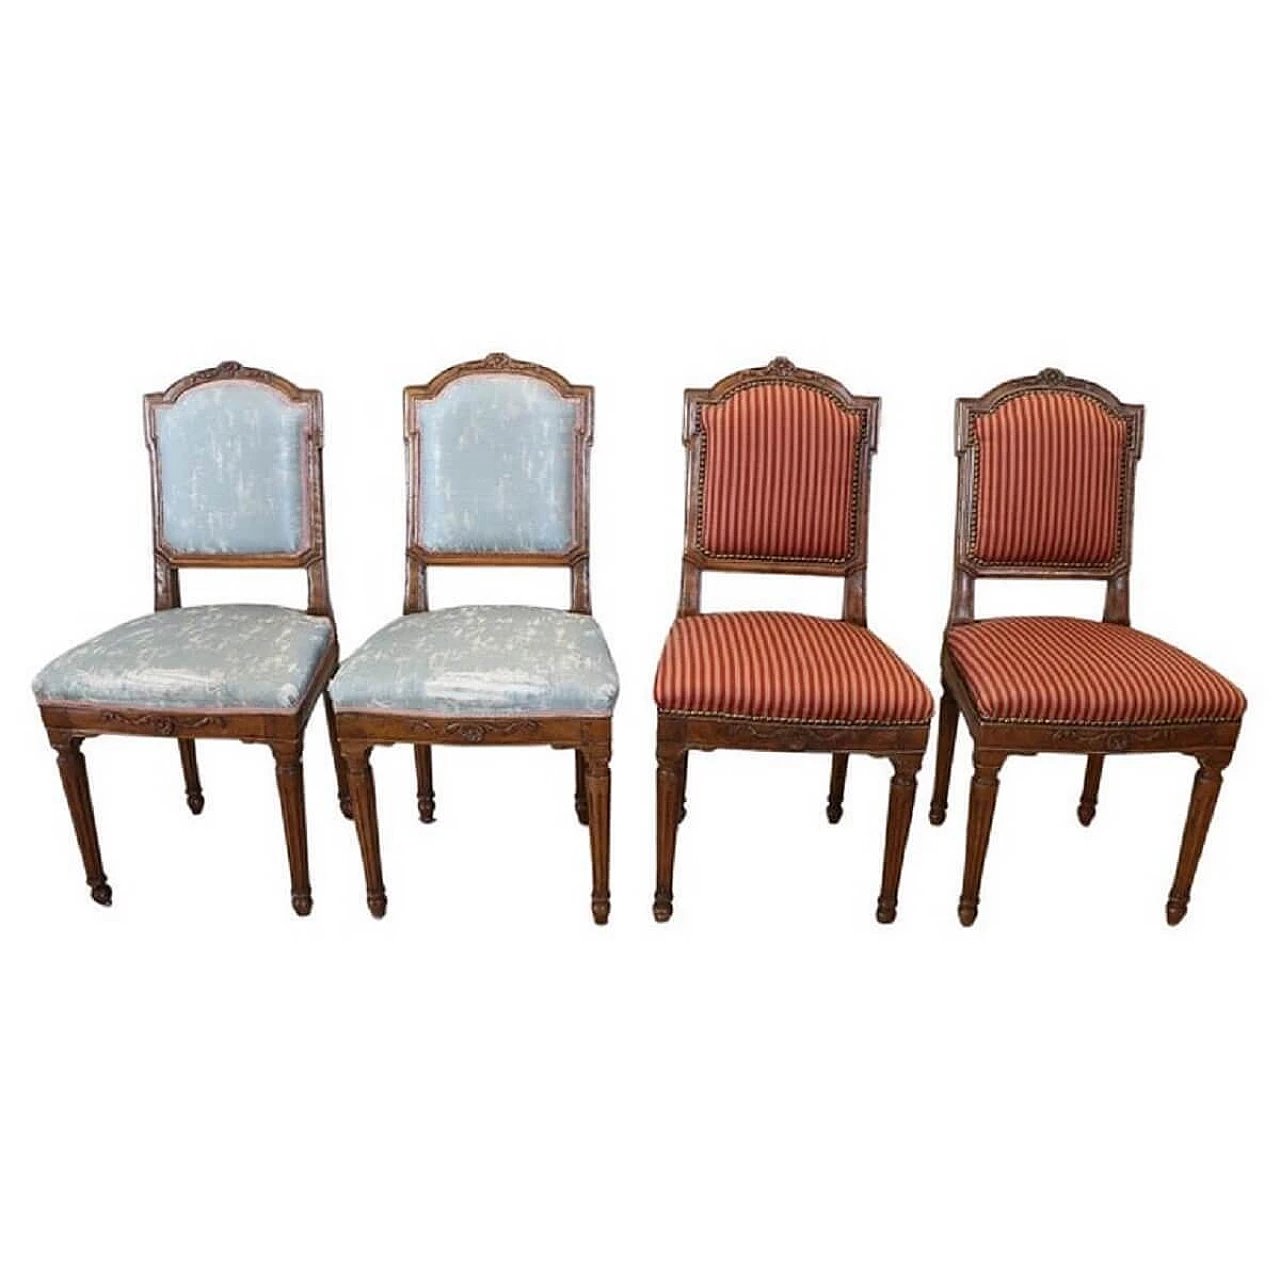 4 Louis XVI chairs in solid walnut and fabric, 18th century 1